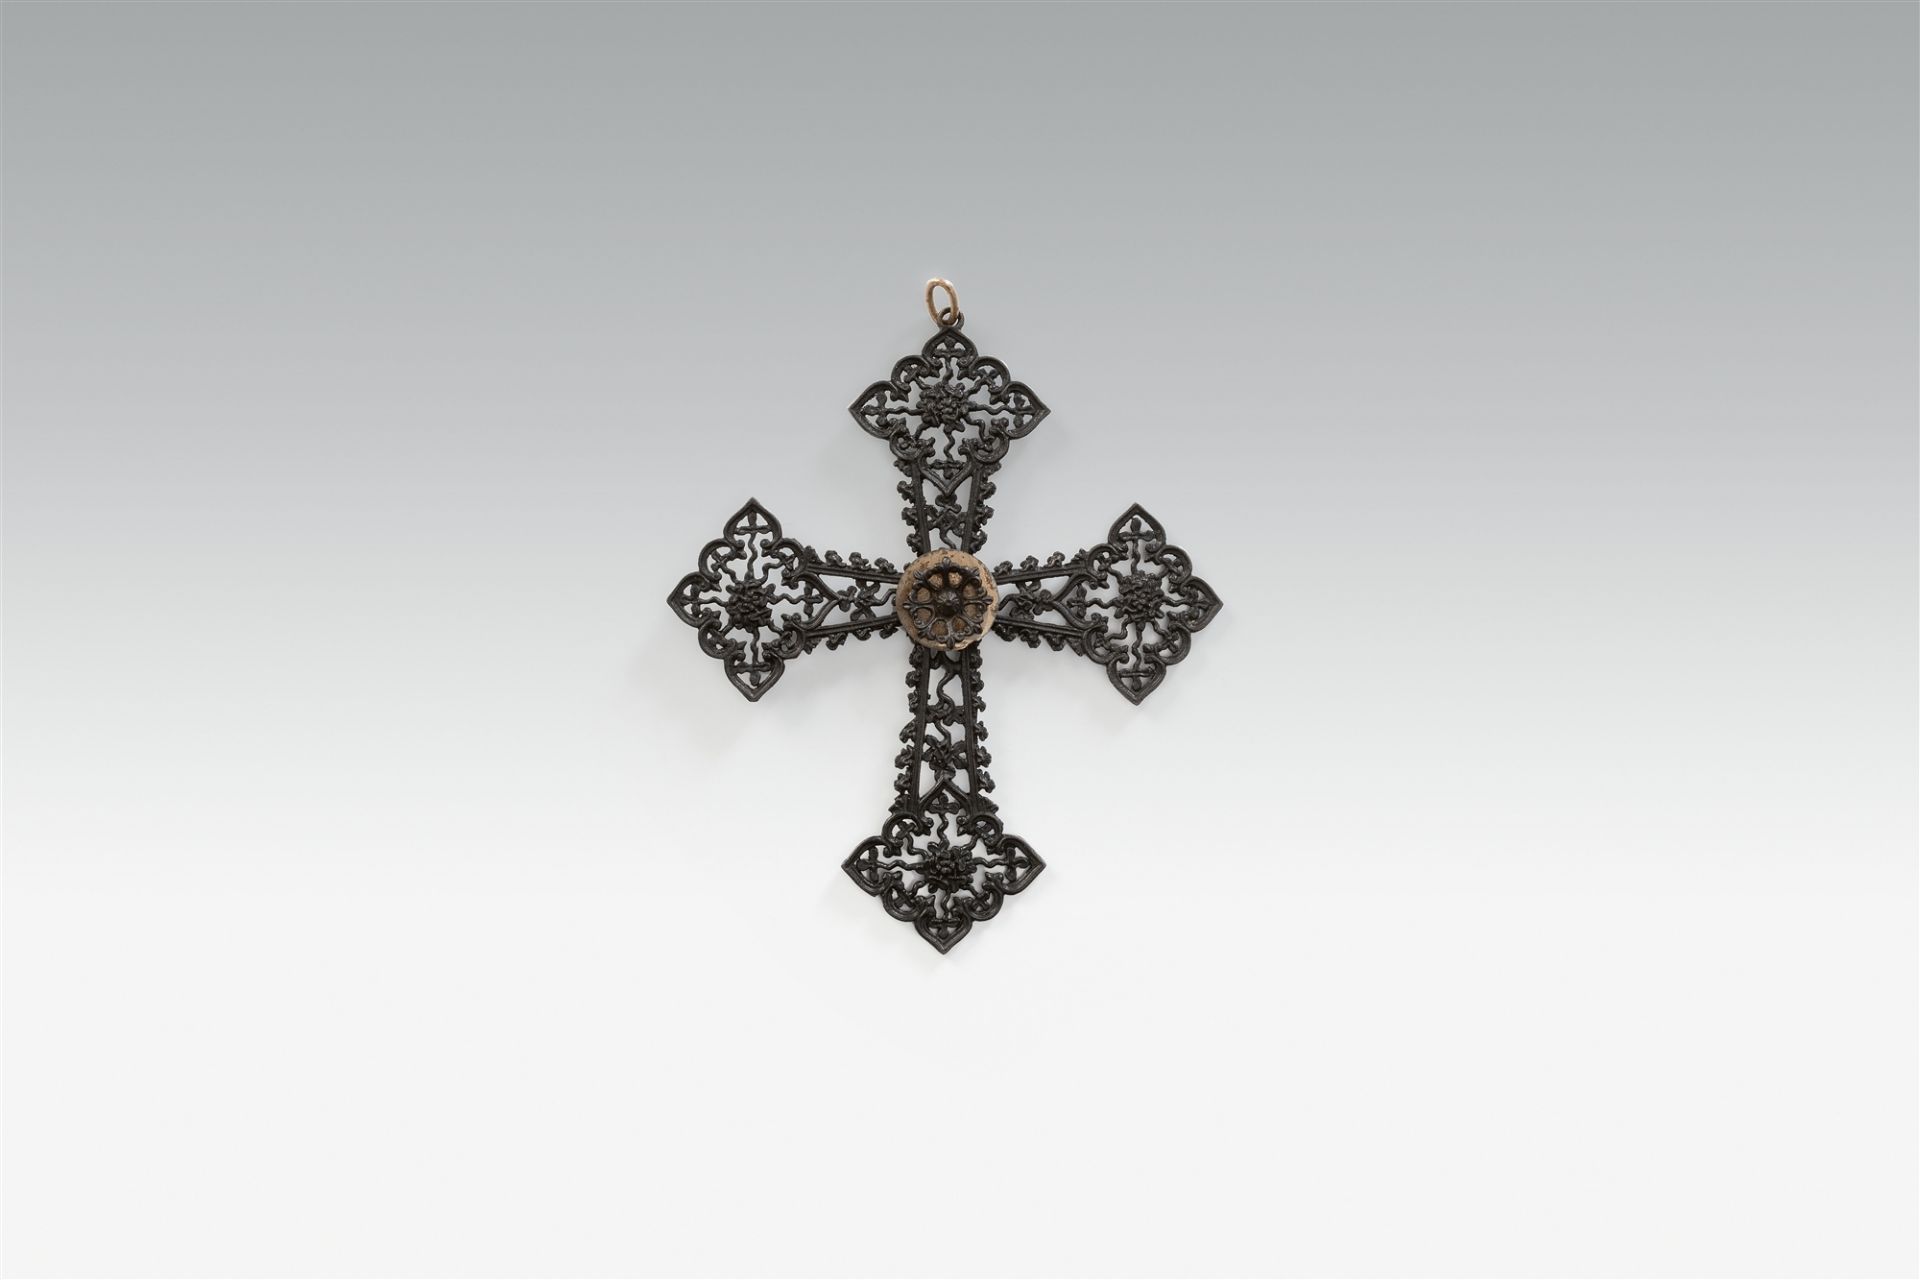 A cast iron and polished steel cross pendant